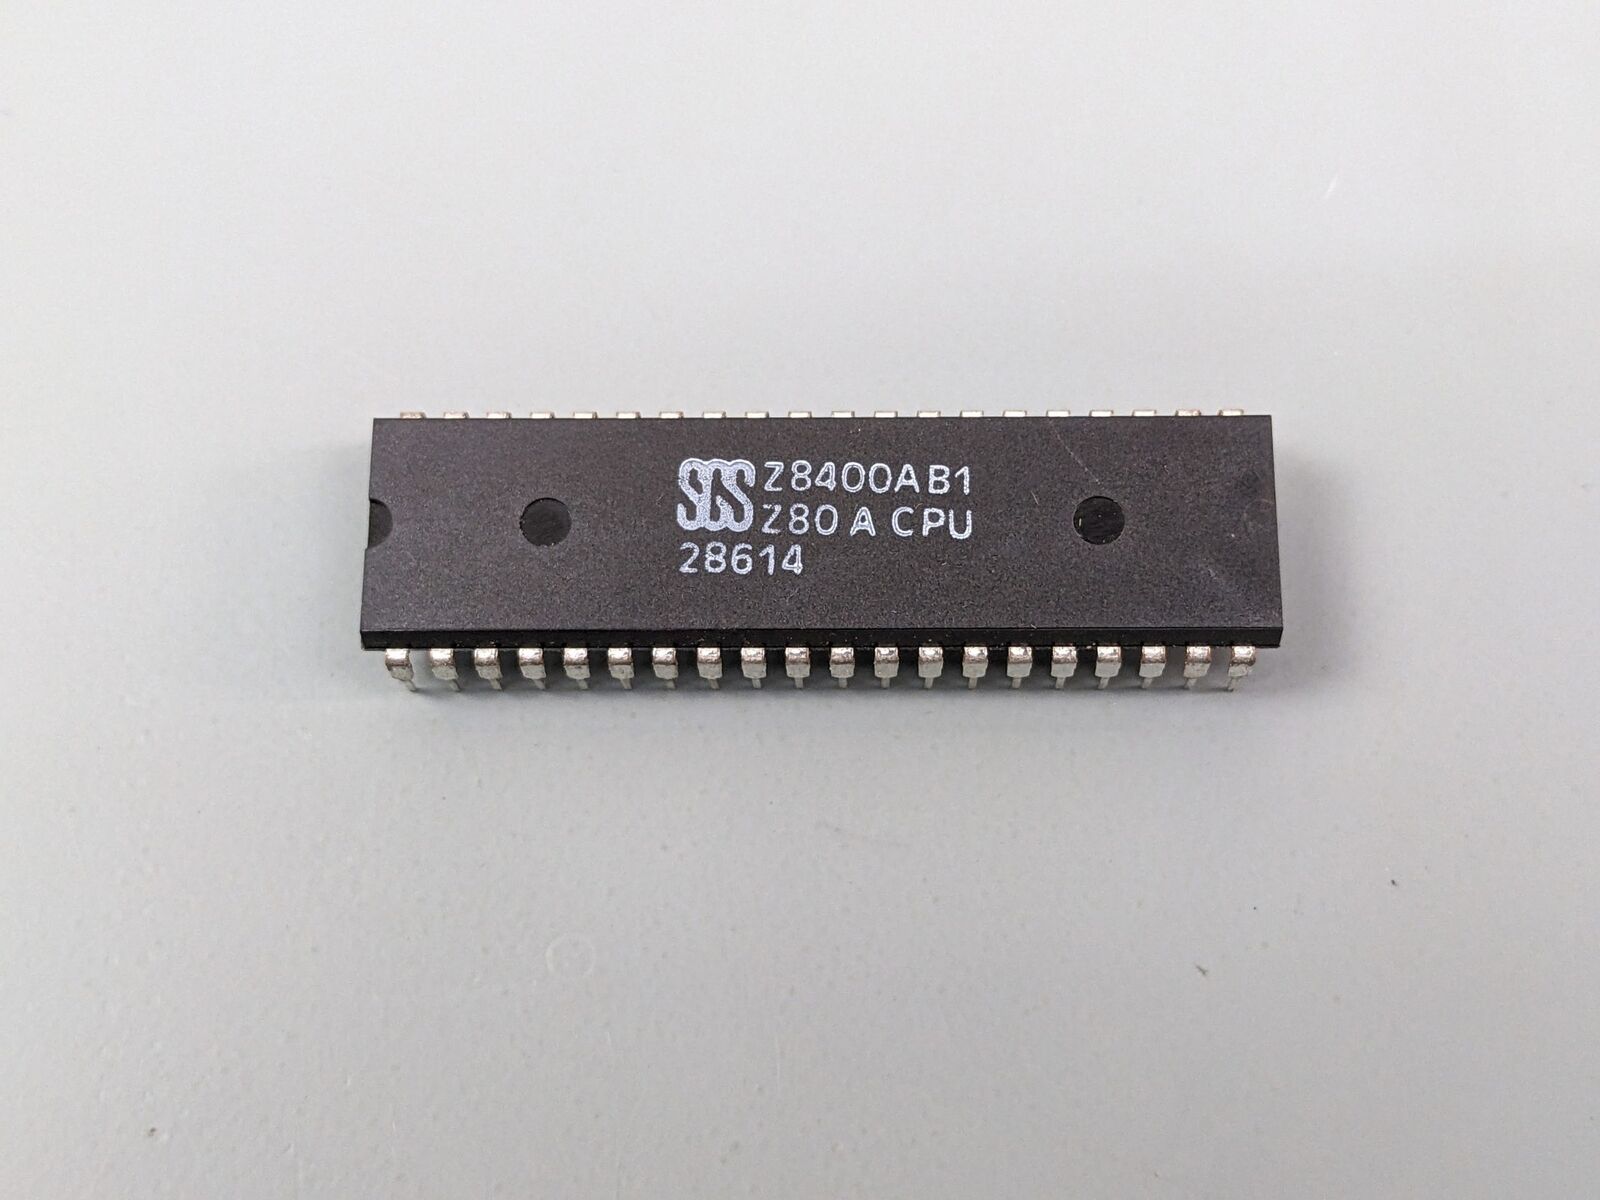 NOS SGS Z80A CPU, Z8400AB1 (4MHz Zilog Z80A) for Vintage PC, CP/M ~ US STOCK